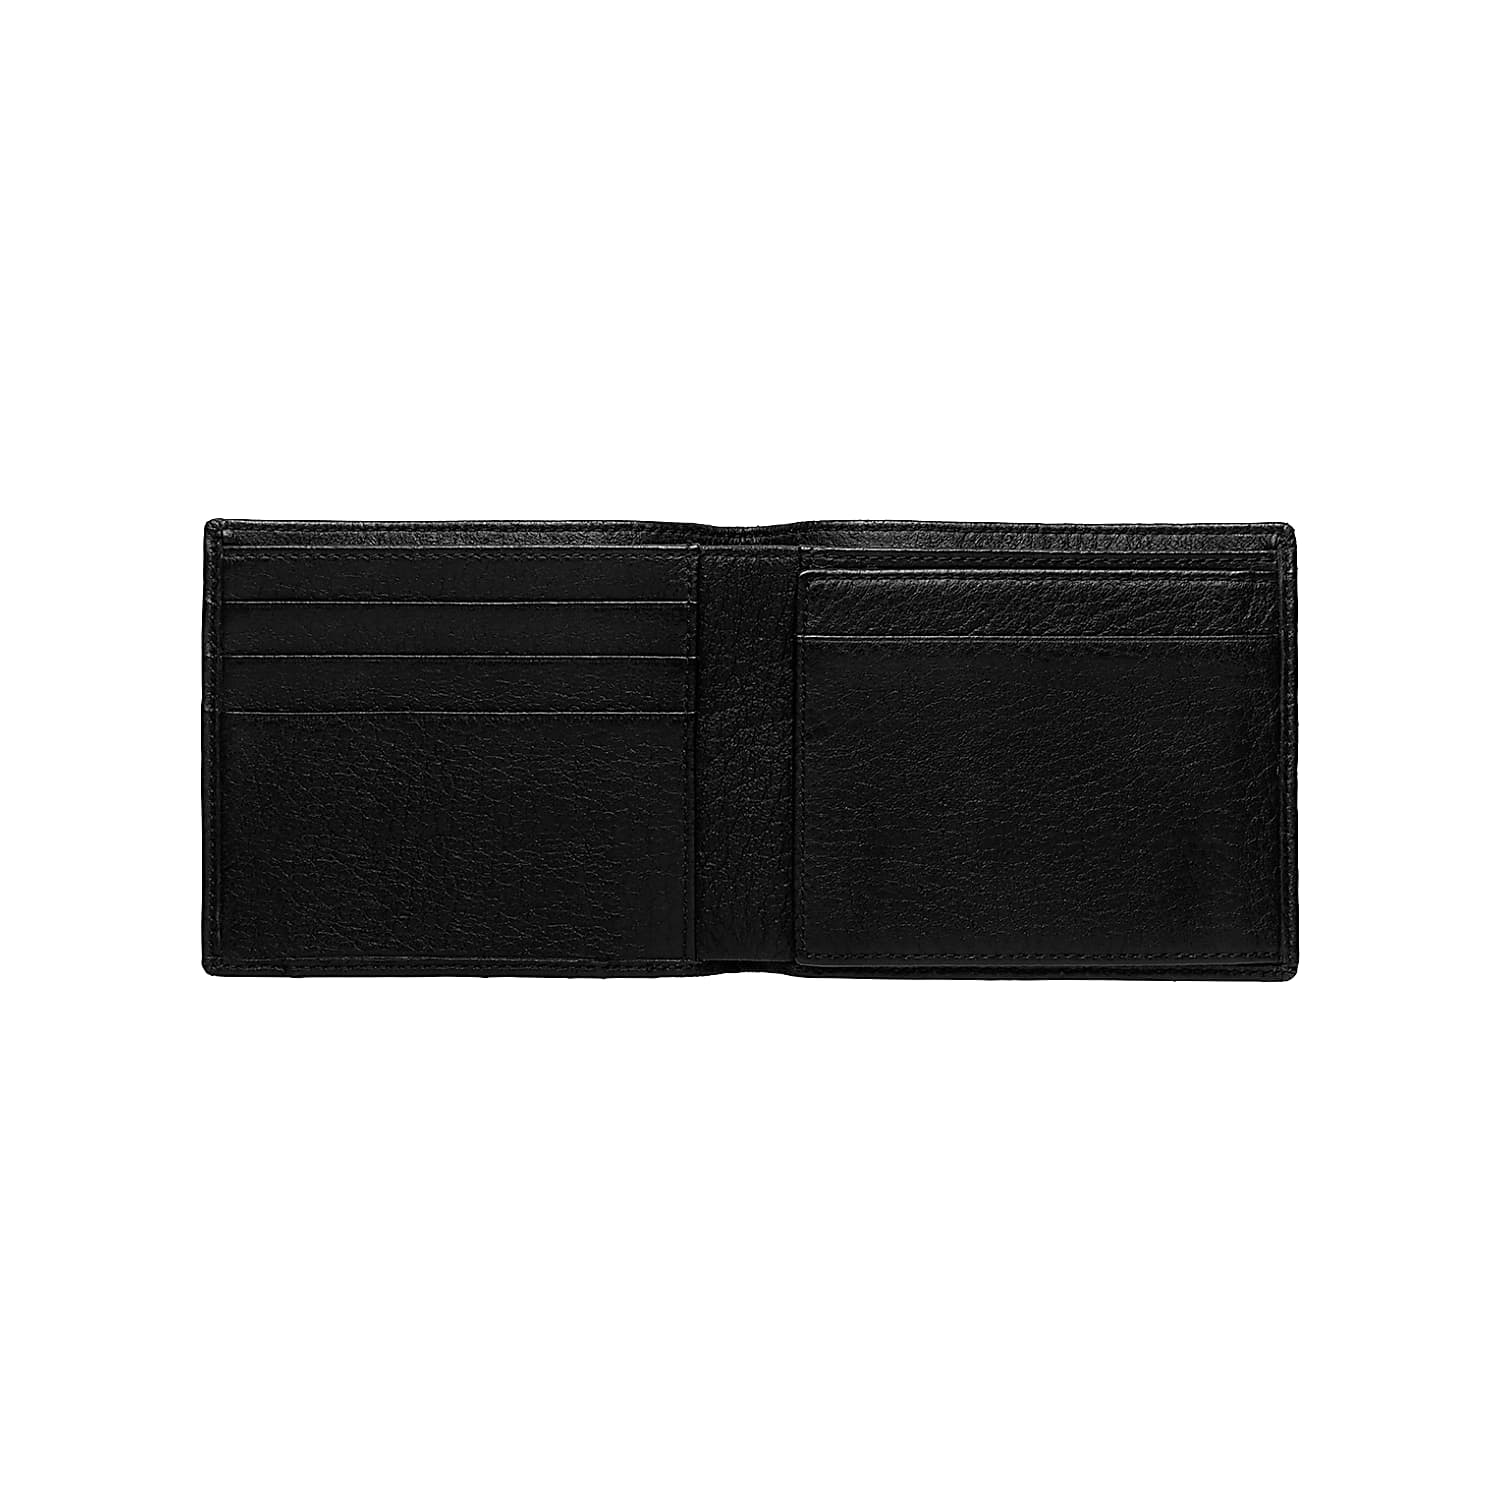 NORTHERN LIGHTS BILL AND CARD CASE